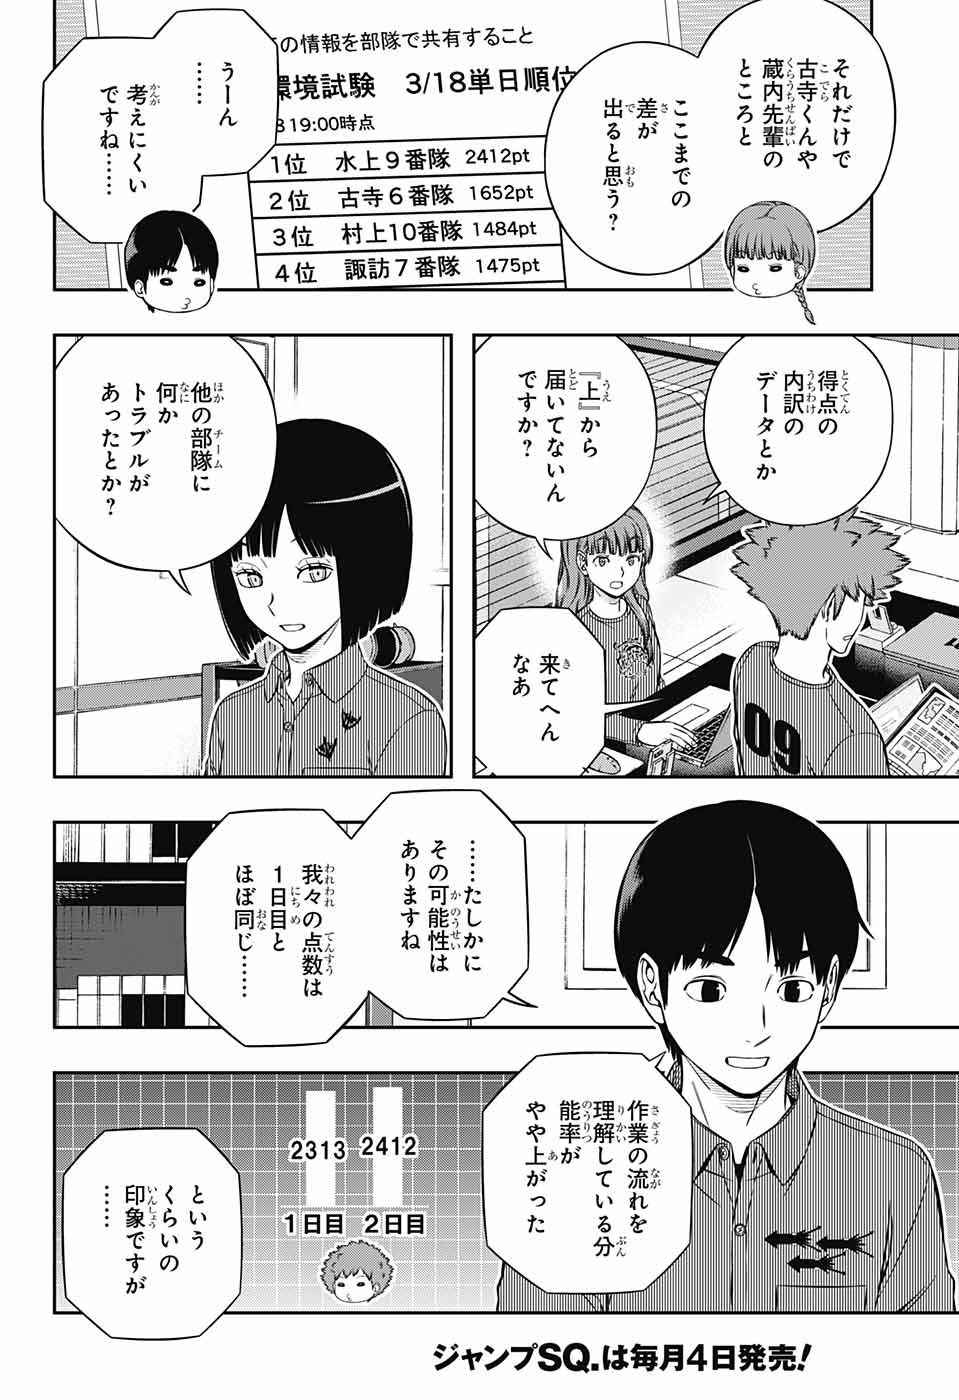 World Trigger - Chapter 222 - Page 2